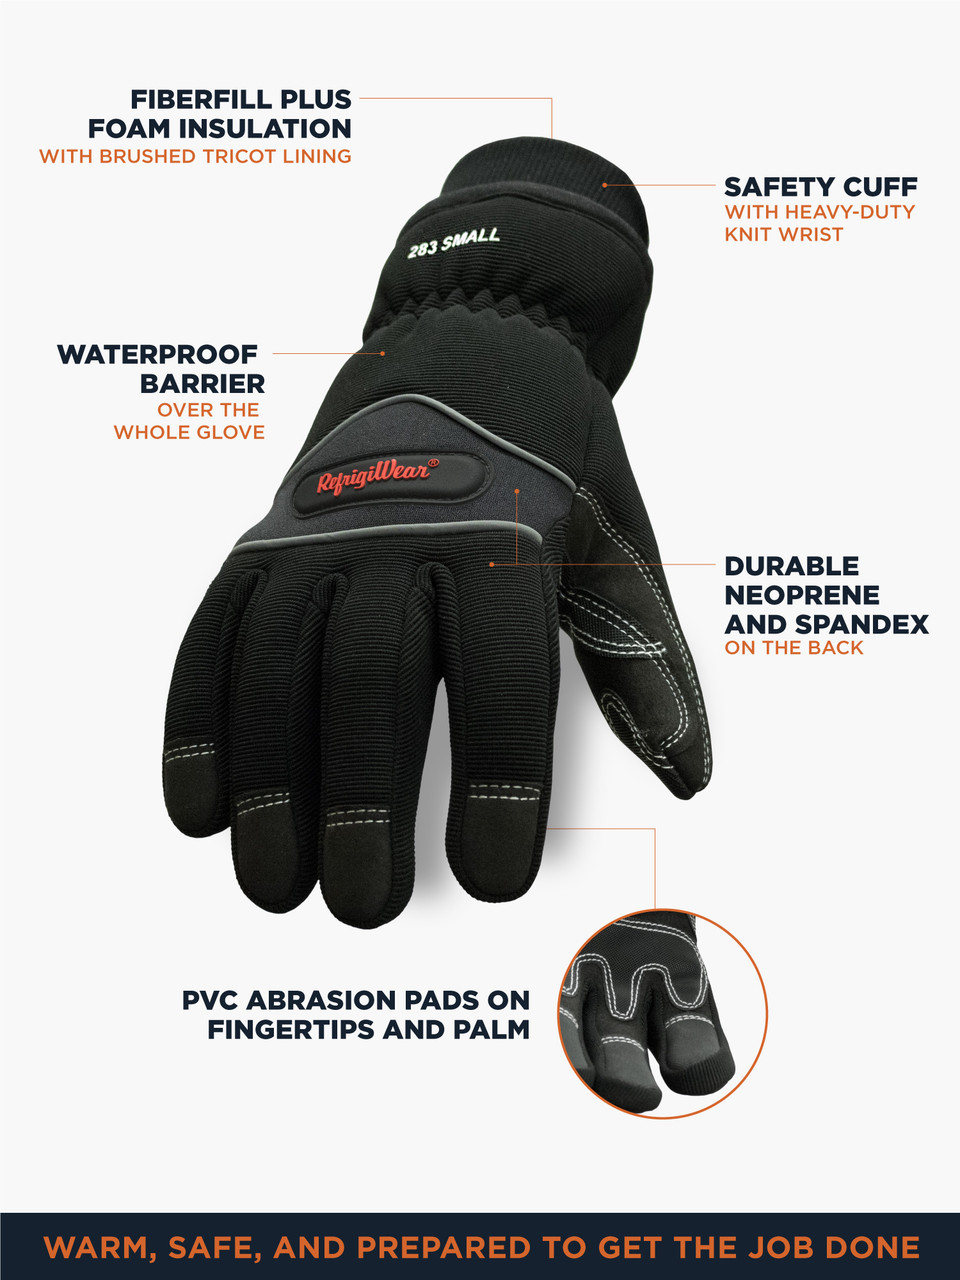 https://cdn11.bigcommerce.com/s-2o3gsghf8c/images/stencil/1280x1280/products/1307/3492/0283-Warm-Waterproof-Fiberfill-Insulated-Lined-High-Dexterity-Work-Gloves---Black__63498.1682356330.jpg?c=1